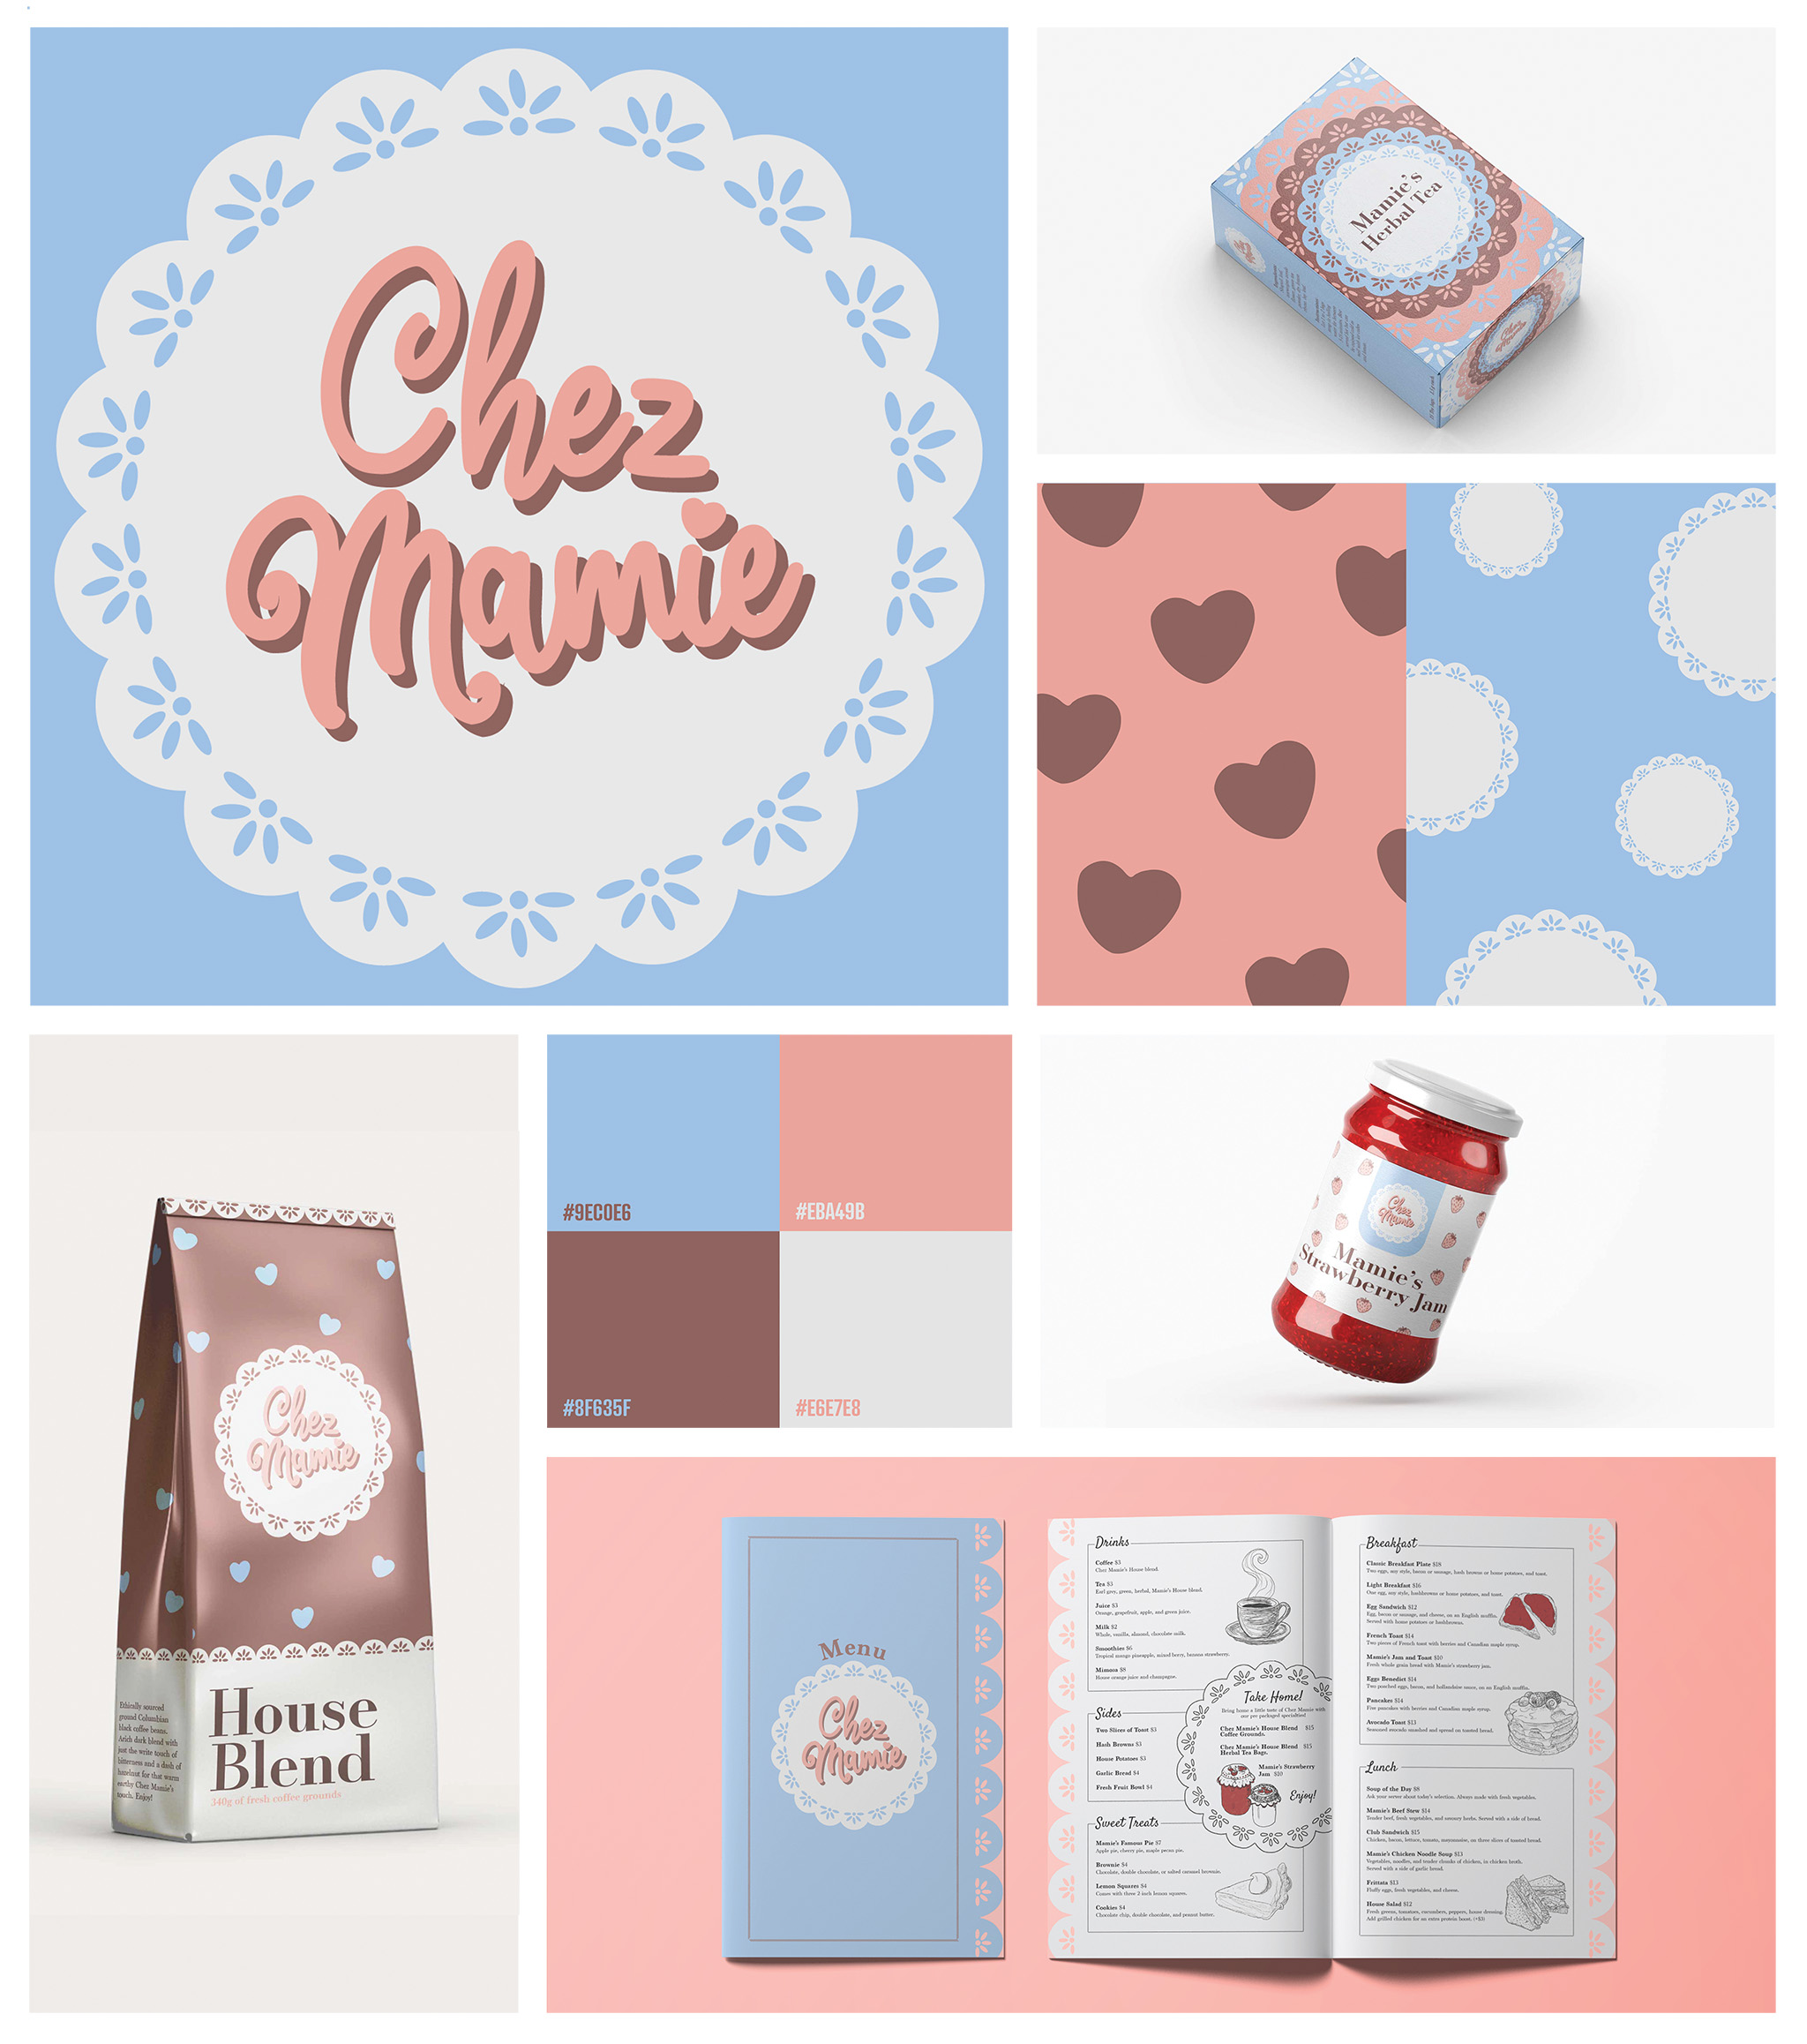 Image of a grid-style branding presentation featuring a logo, 3 examples of packaging design, some pattern, color schemes and a mockup menu for a restaurant called Chez Mamie.